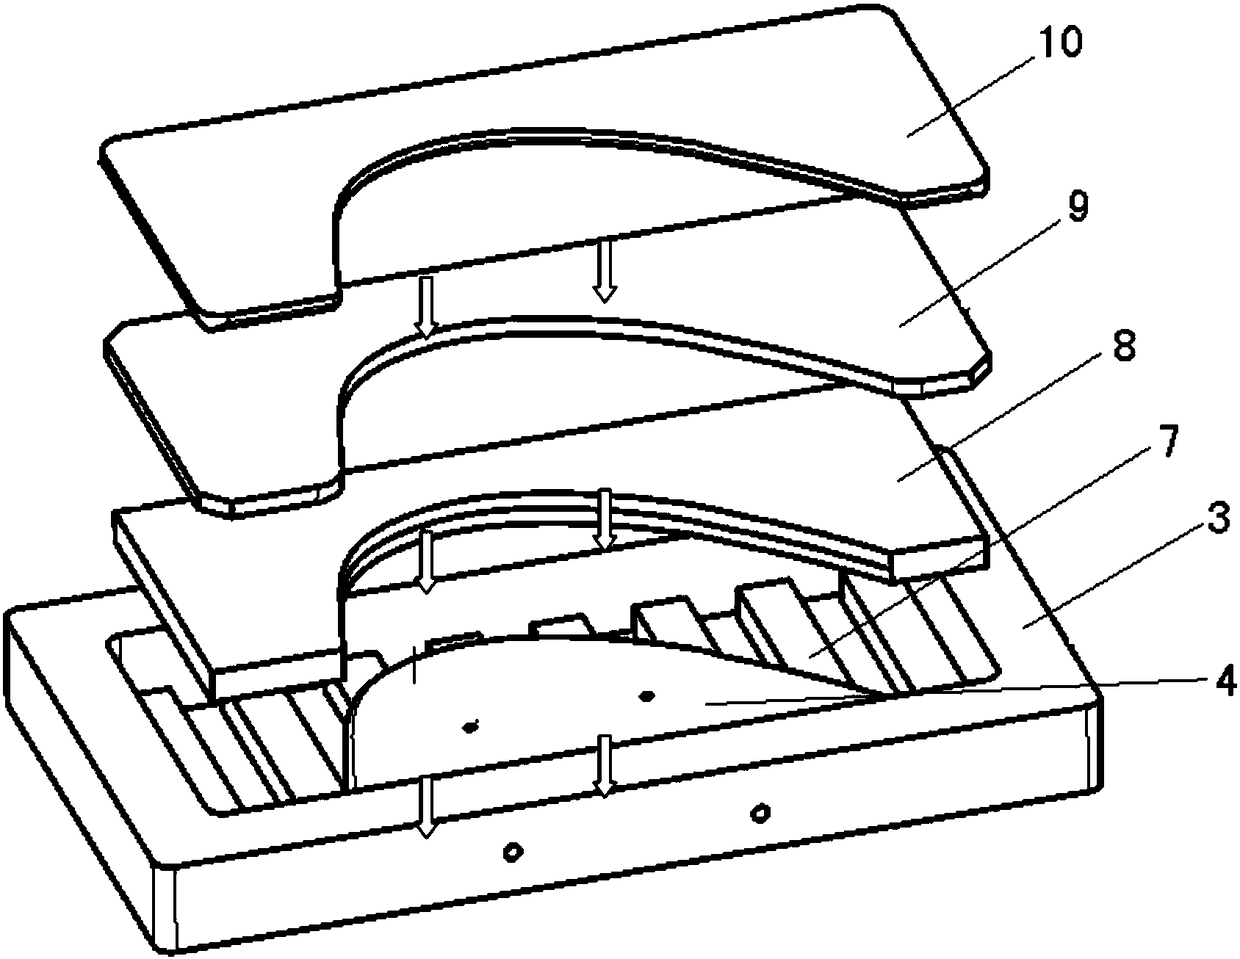 Rubber forming method and forming die for sheet metal parts with large curvature and high flanging